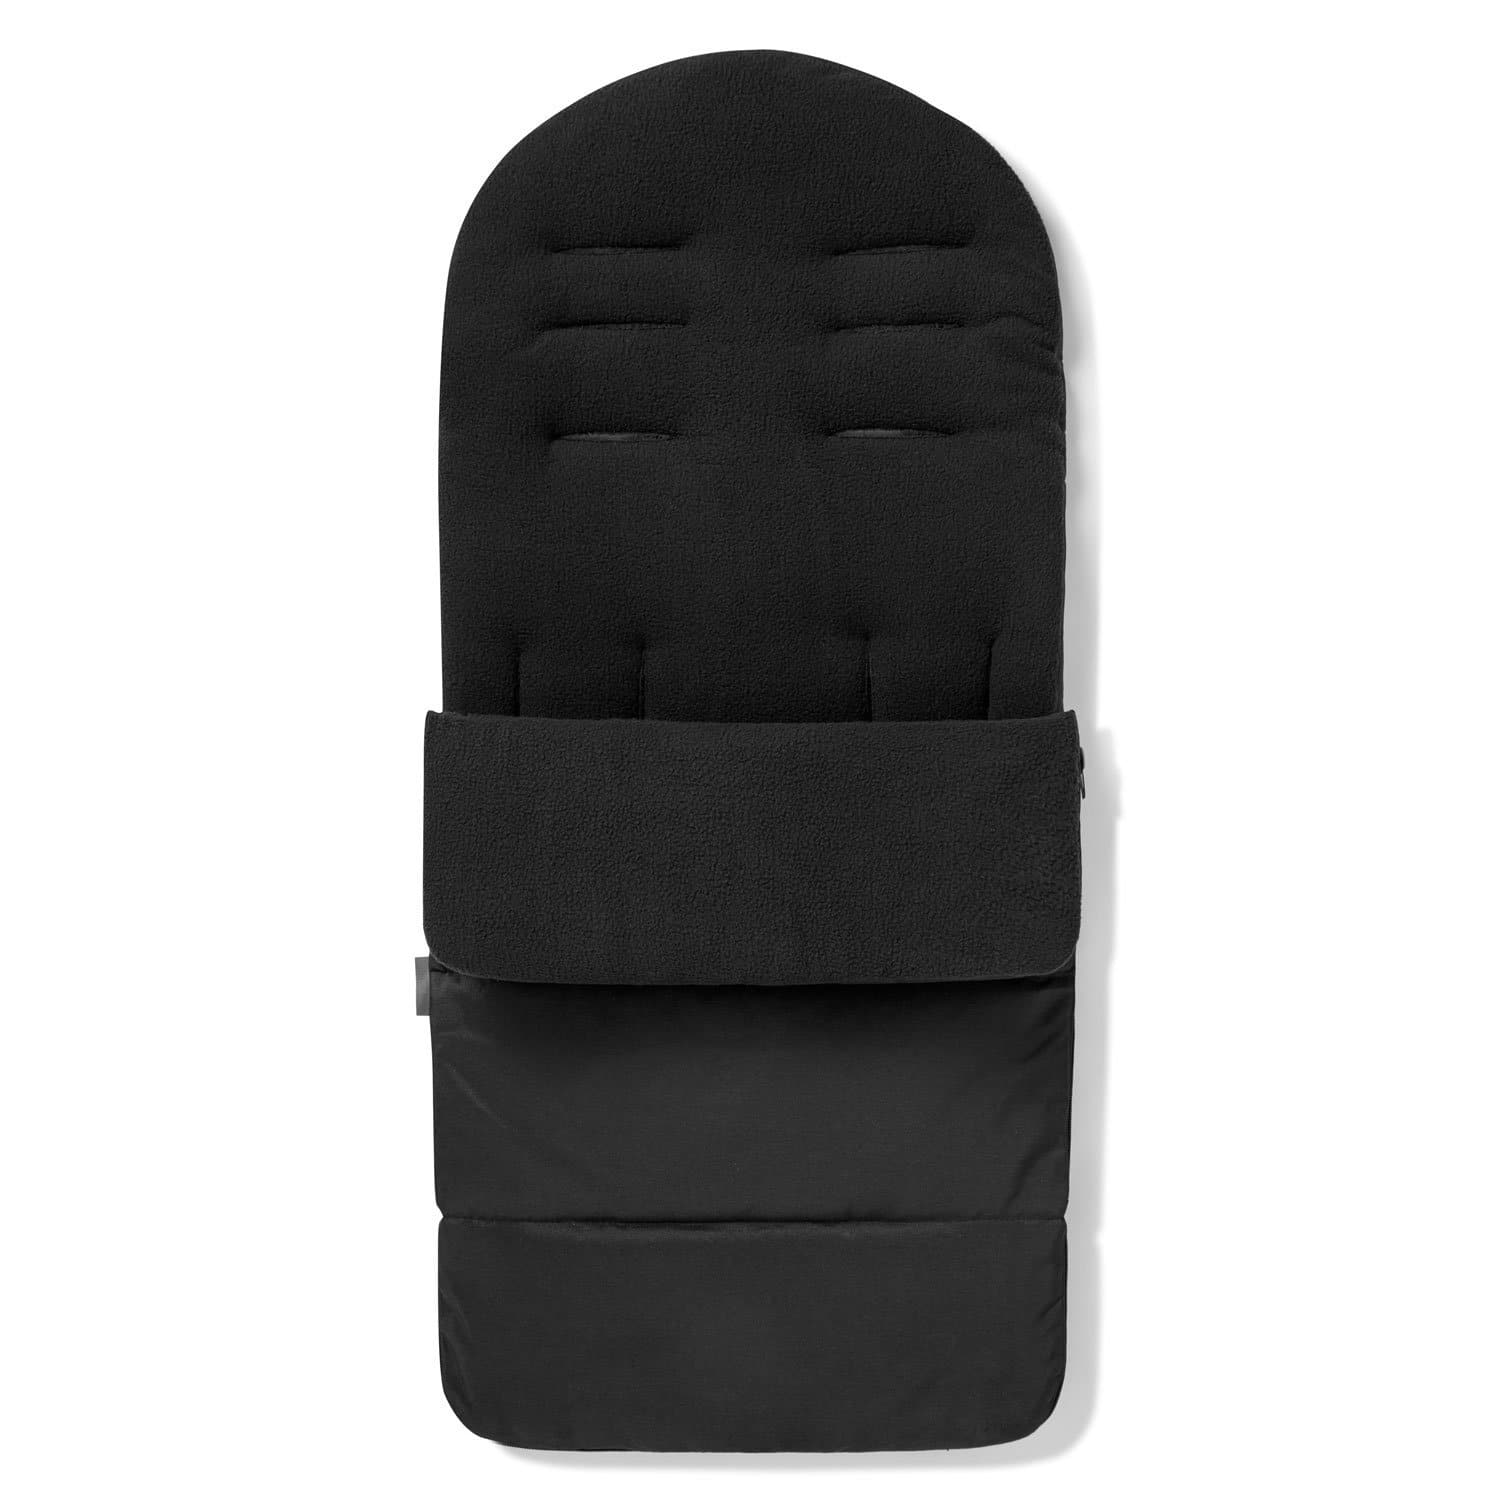 Premium Footmuff / Cosy Toes Compatible with Gesslein - Black Jack / Fits All Models | For Your Little One